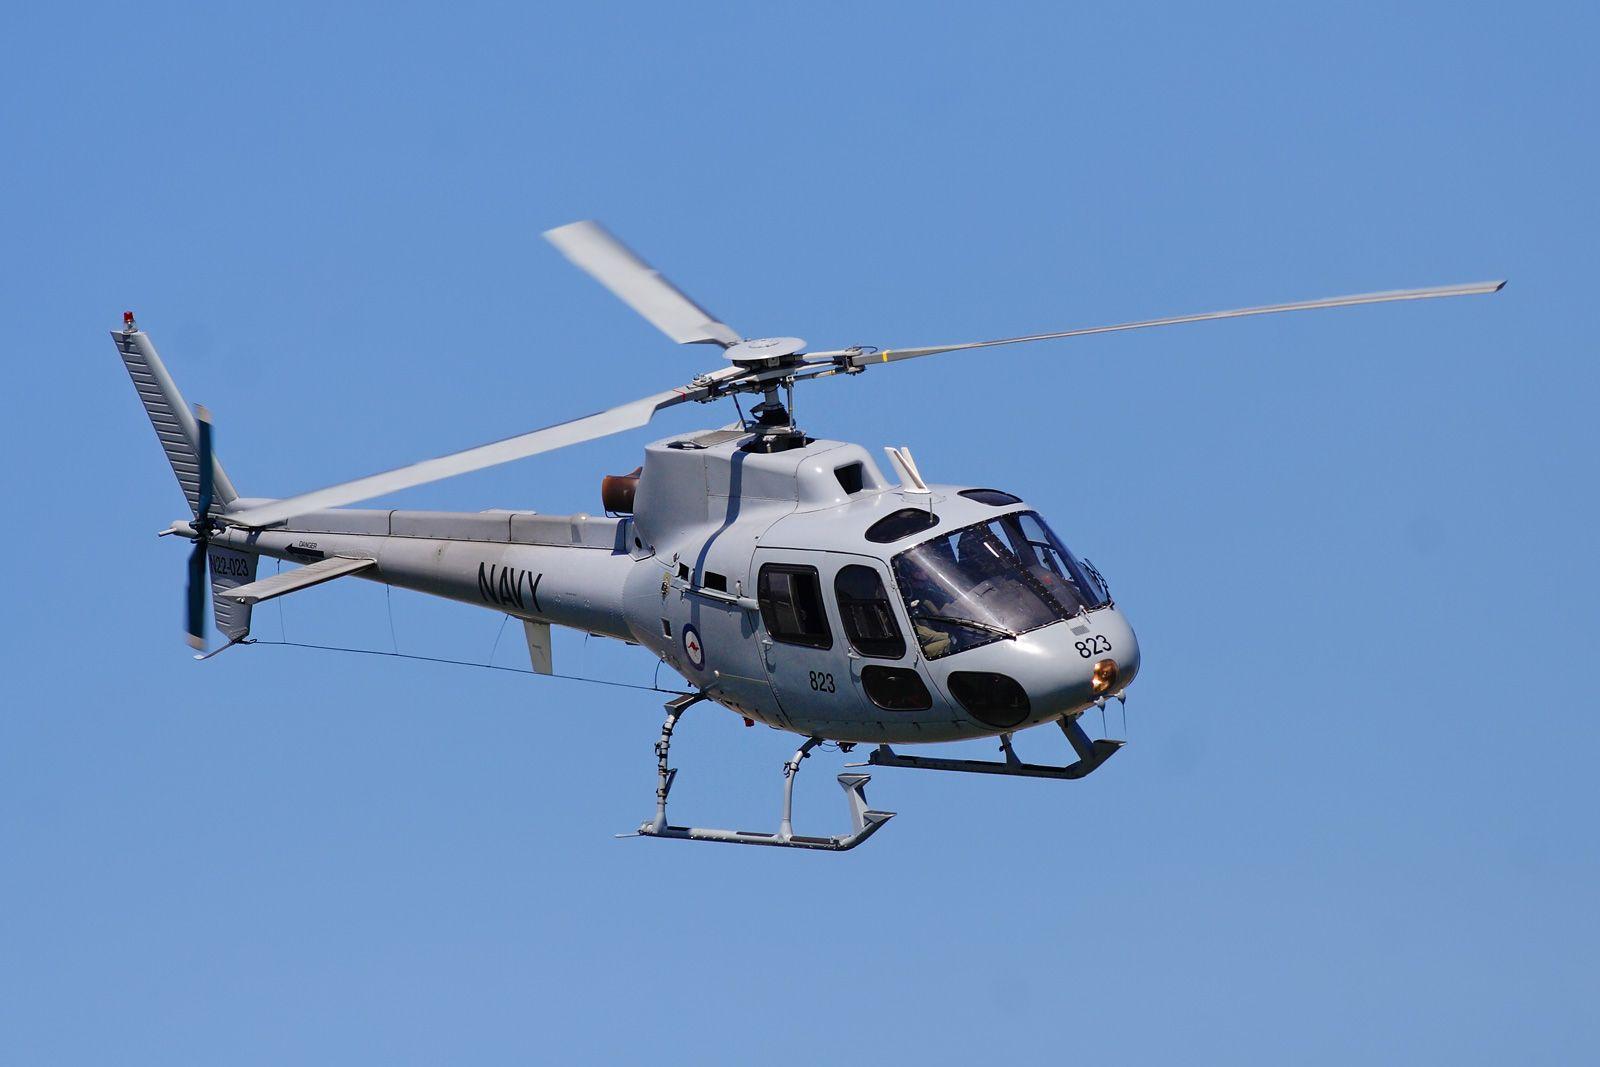 Helicopter wallpaper, Vehicles, HQ Helicopter pictureK Wallpaper